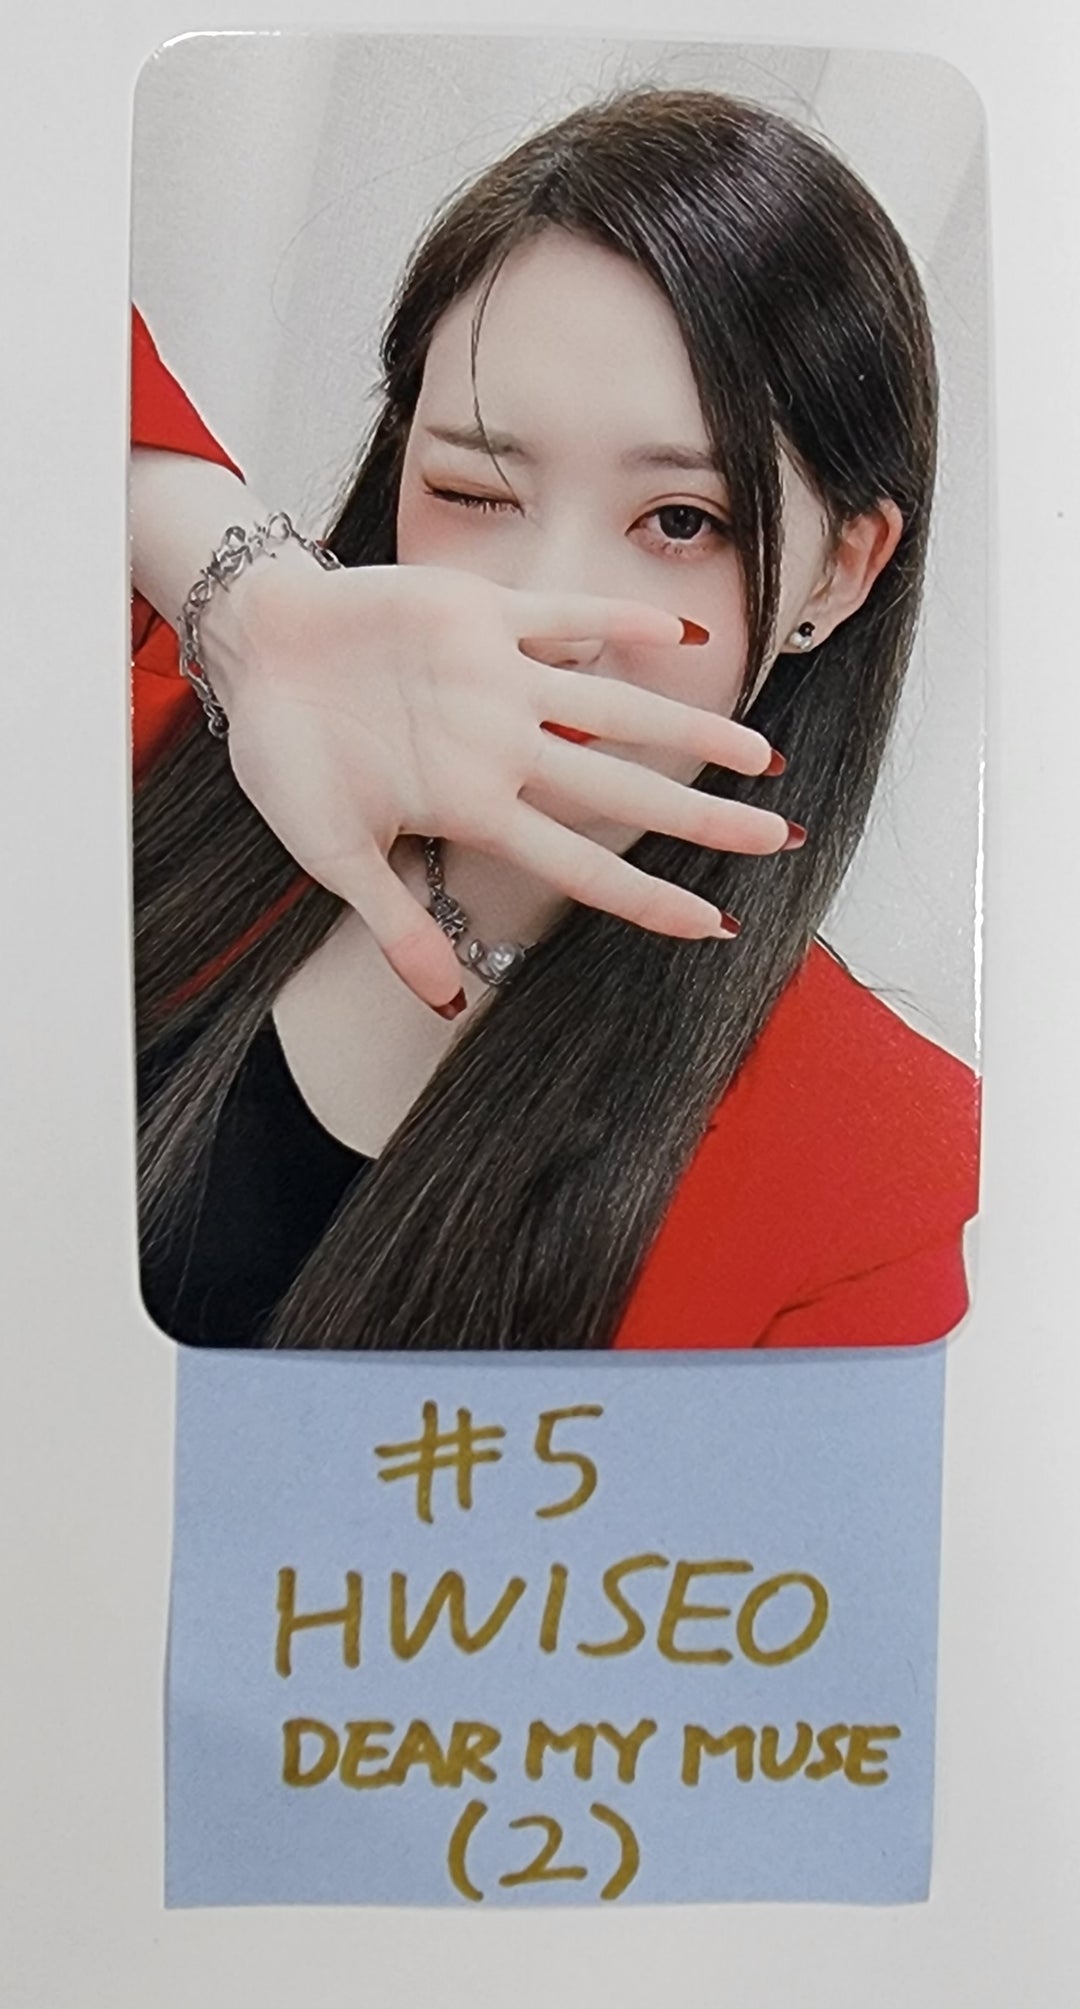 H1-KEY "Rose Blossom" Mini 1st - Dear My Muse Fansign Event Photocard Round 2